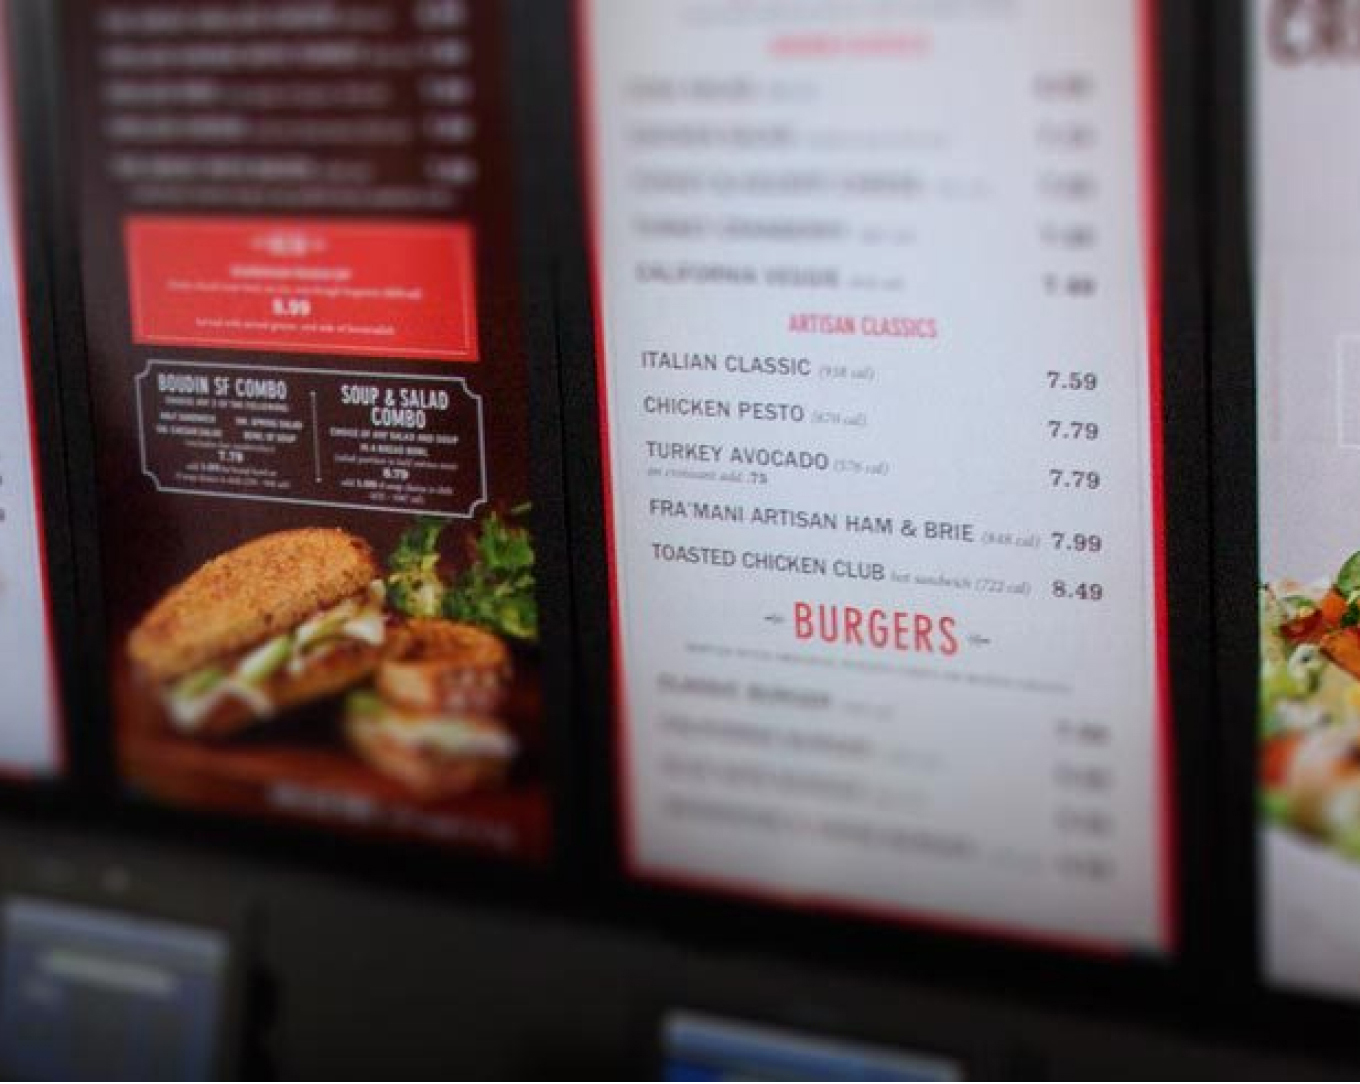 A close-up view of part of a menu board showing sandwiches and burgers. 							